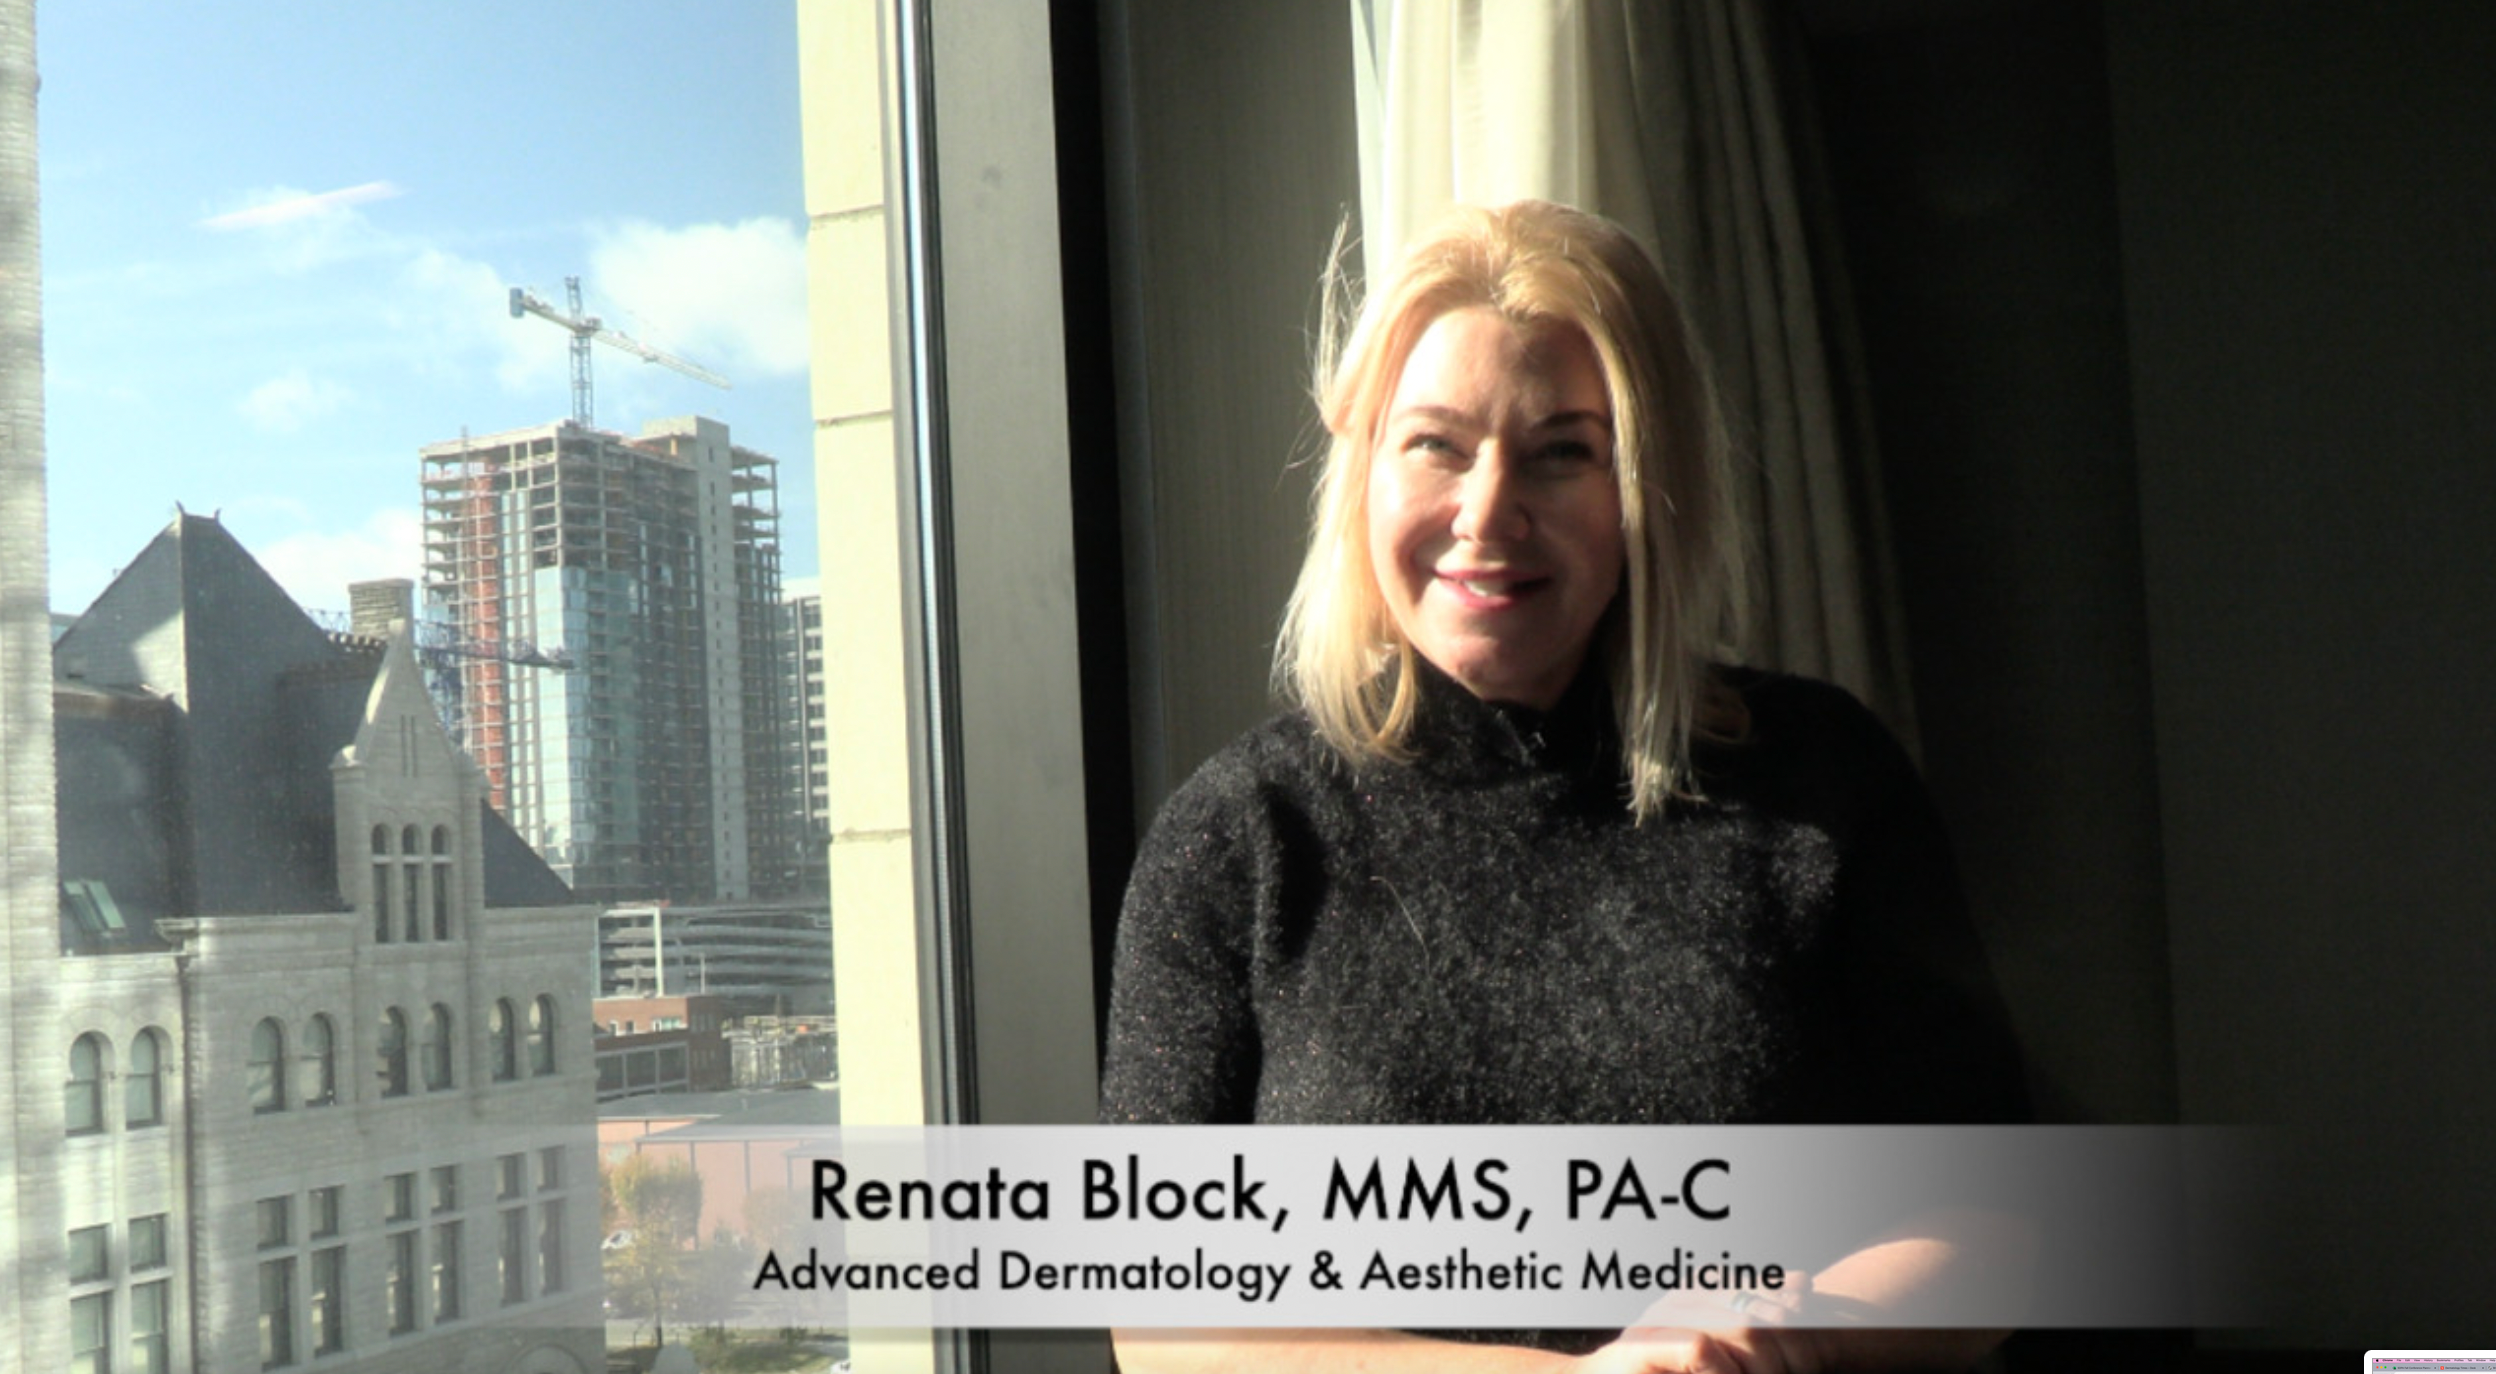 Renata Block, MMS, PA-C: When We Collaborate, The Patient Wins